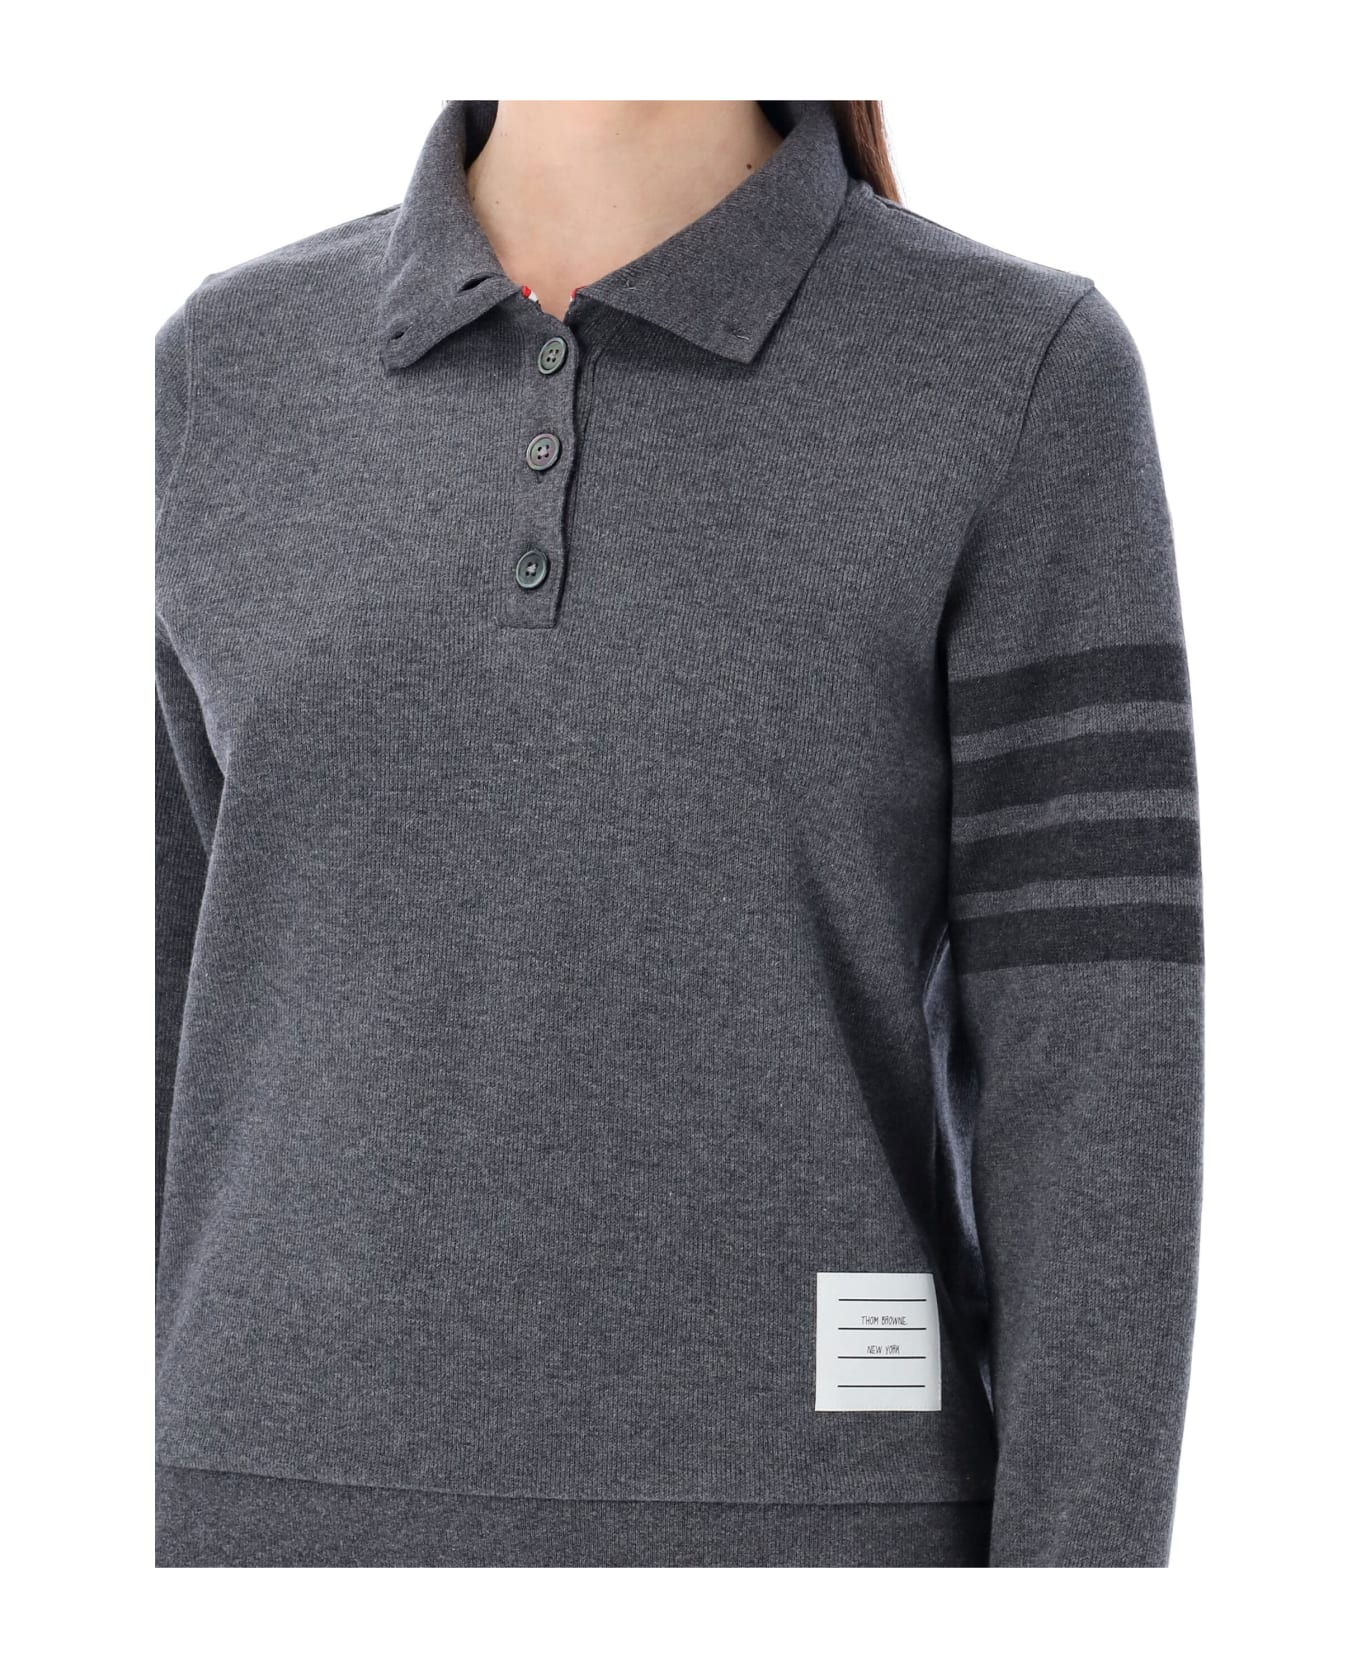 Thom Browne Funnel Neck Pullover With Tonal Bars - Grey ニットウェア